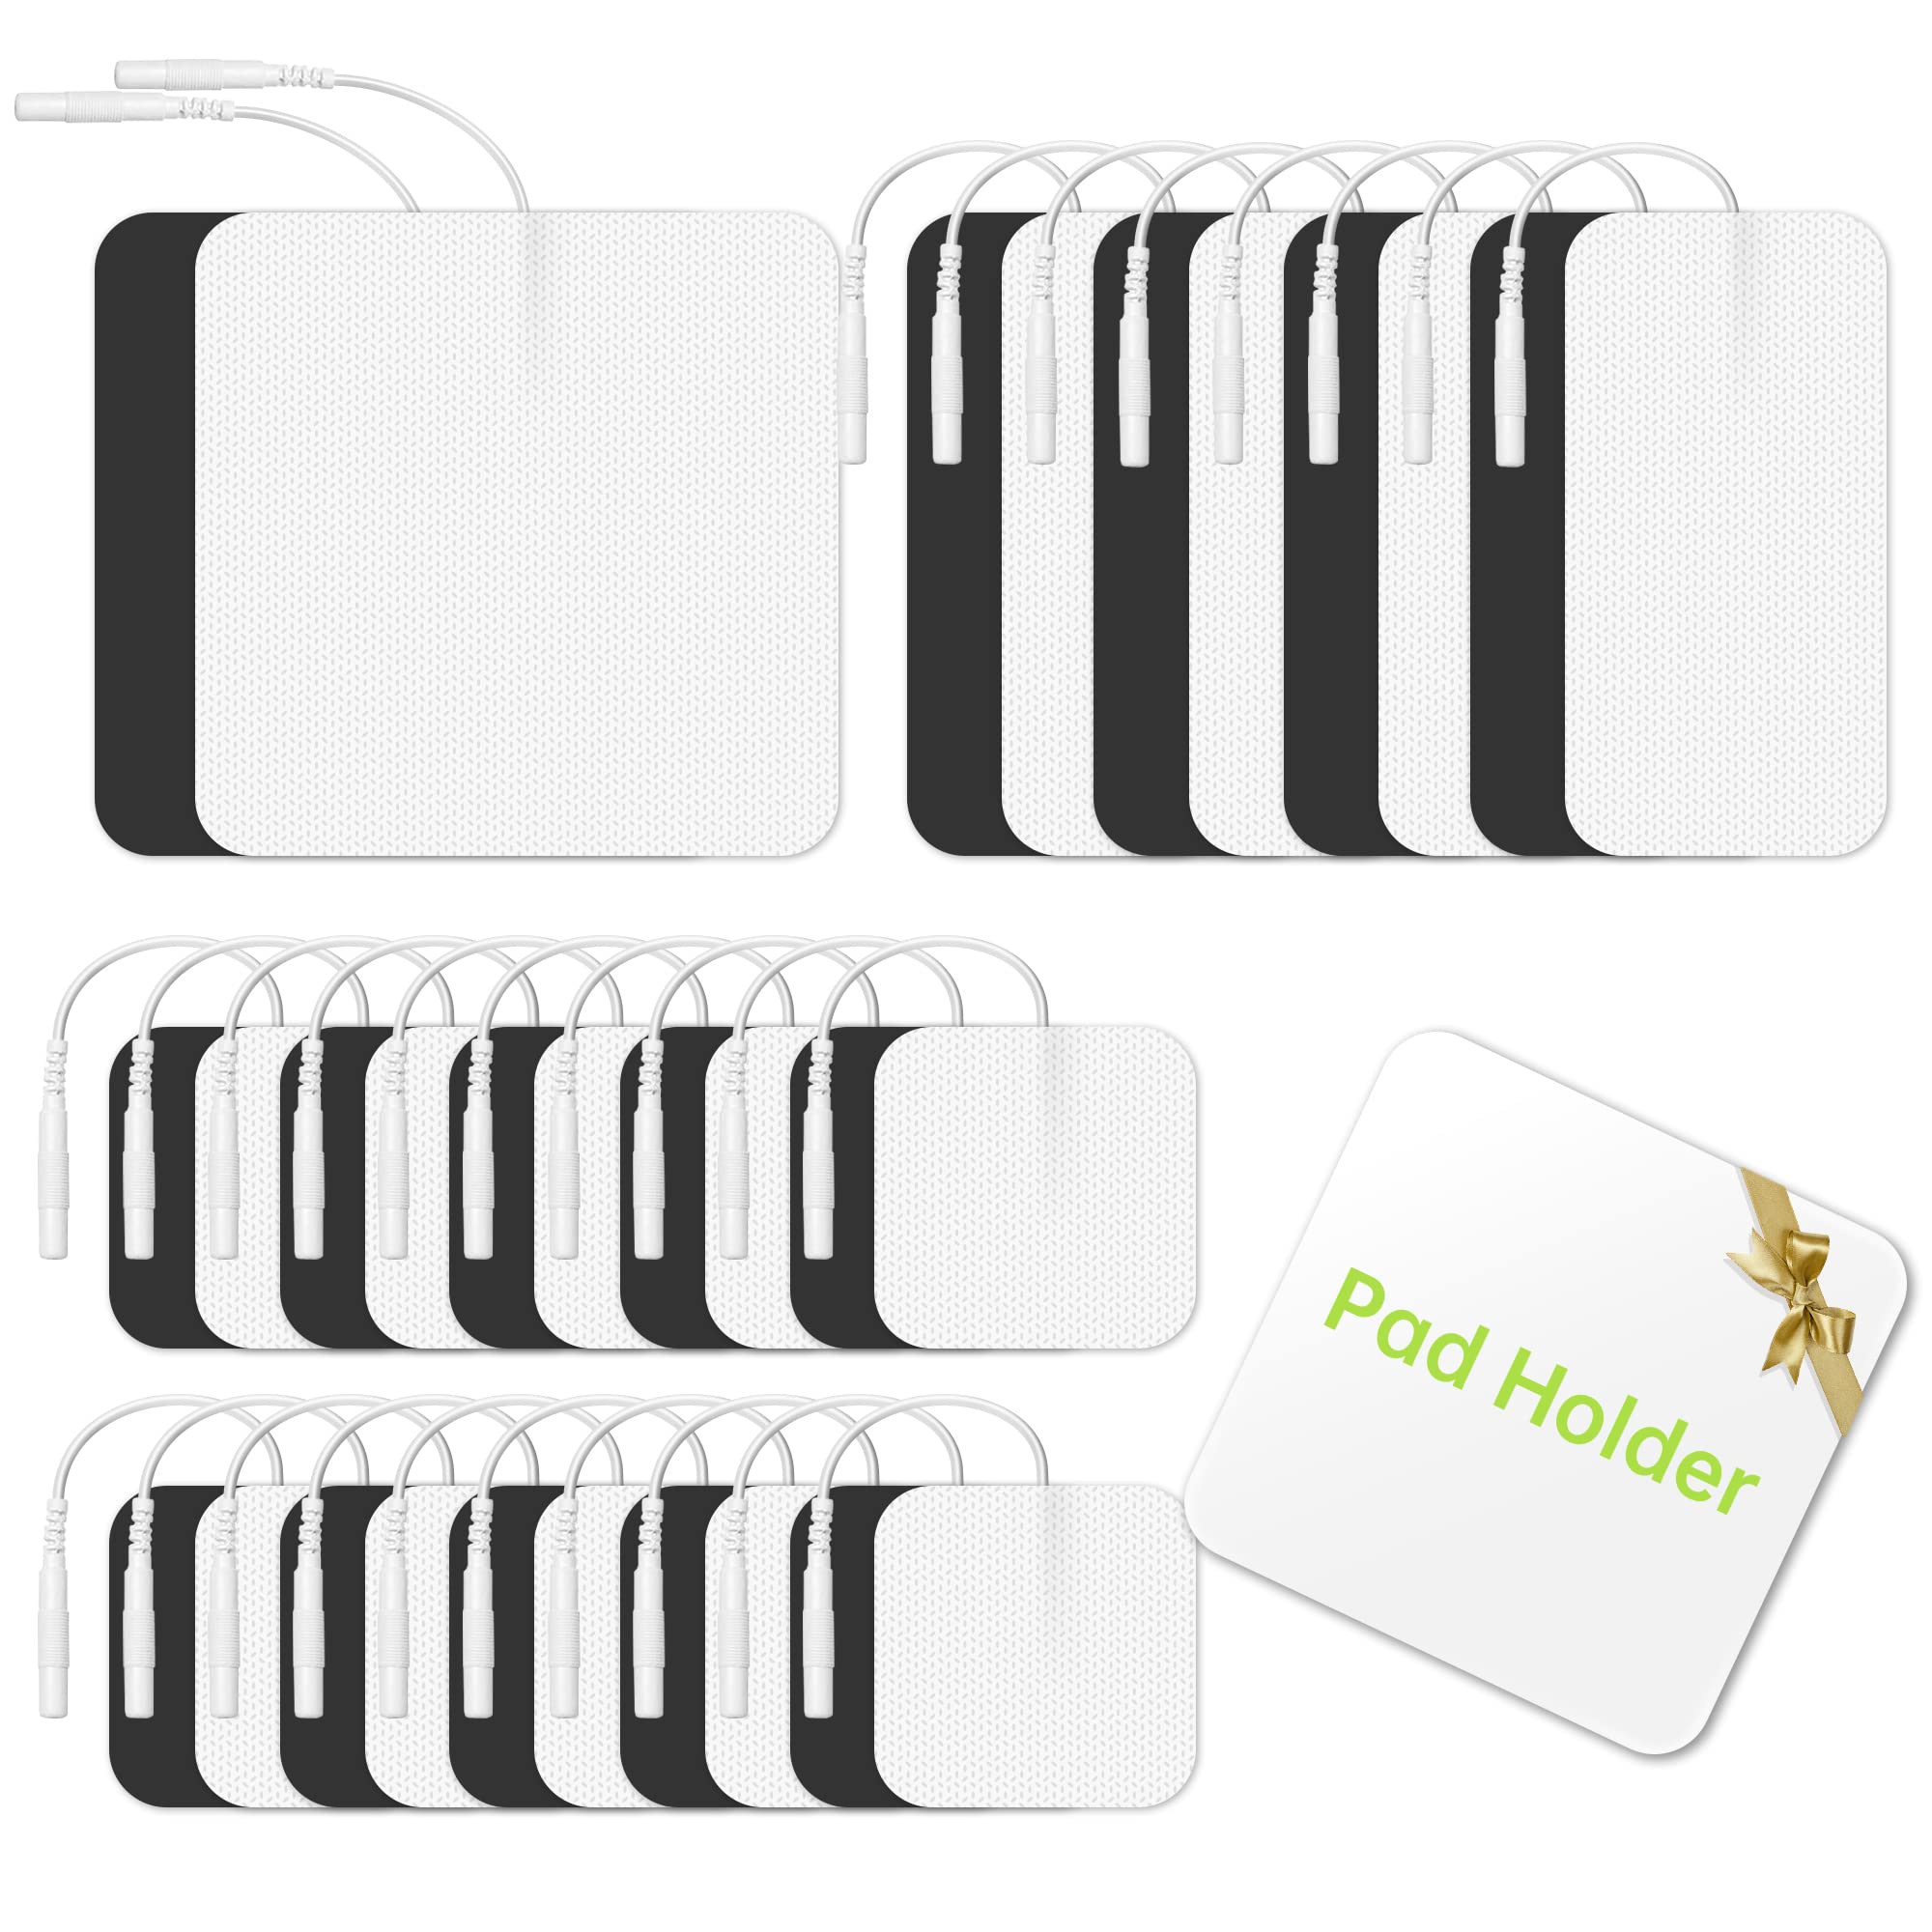 TENS 7000 TENS Unit Pad Holder - Essential to have.